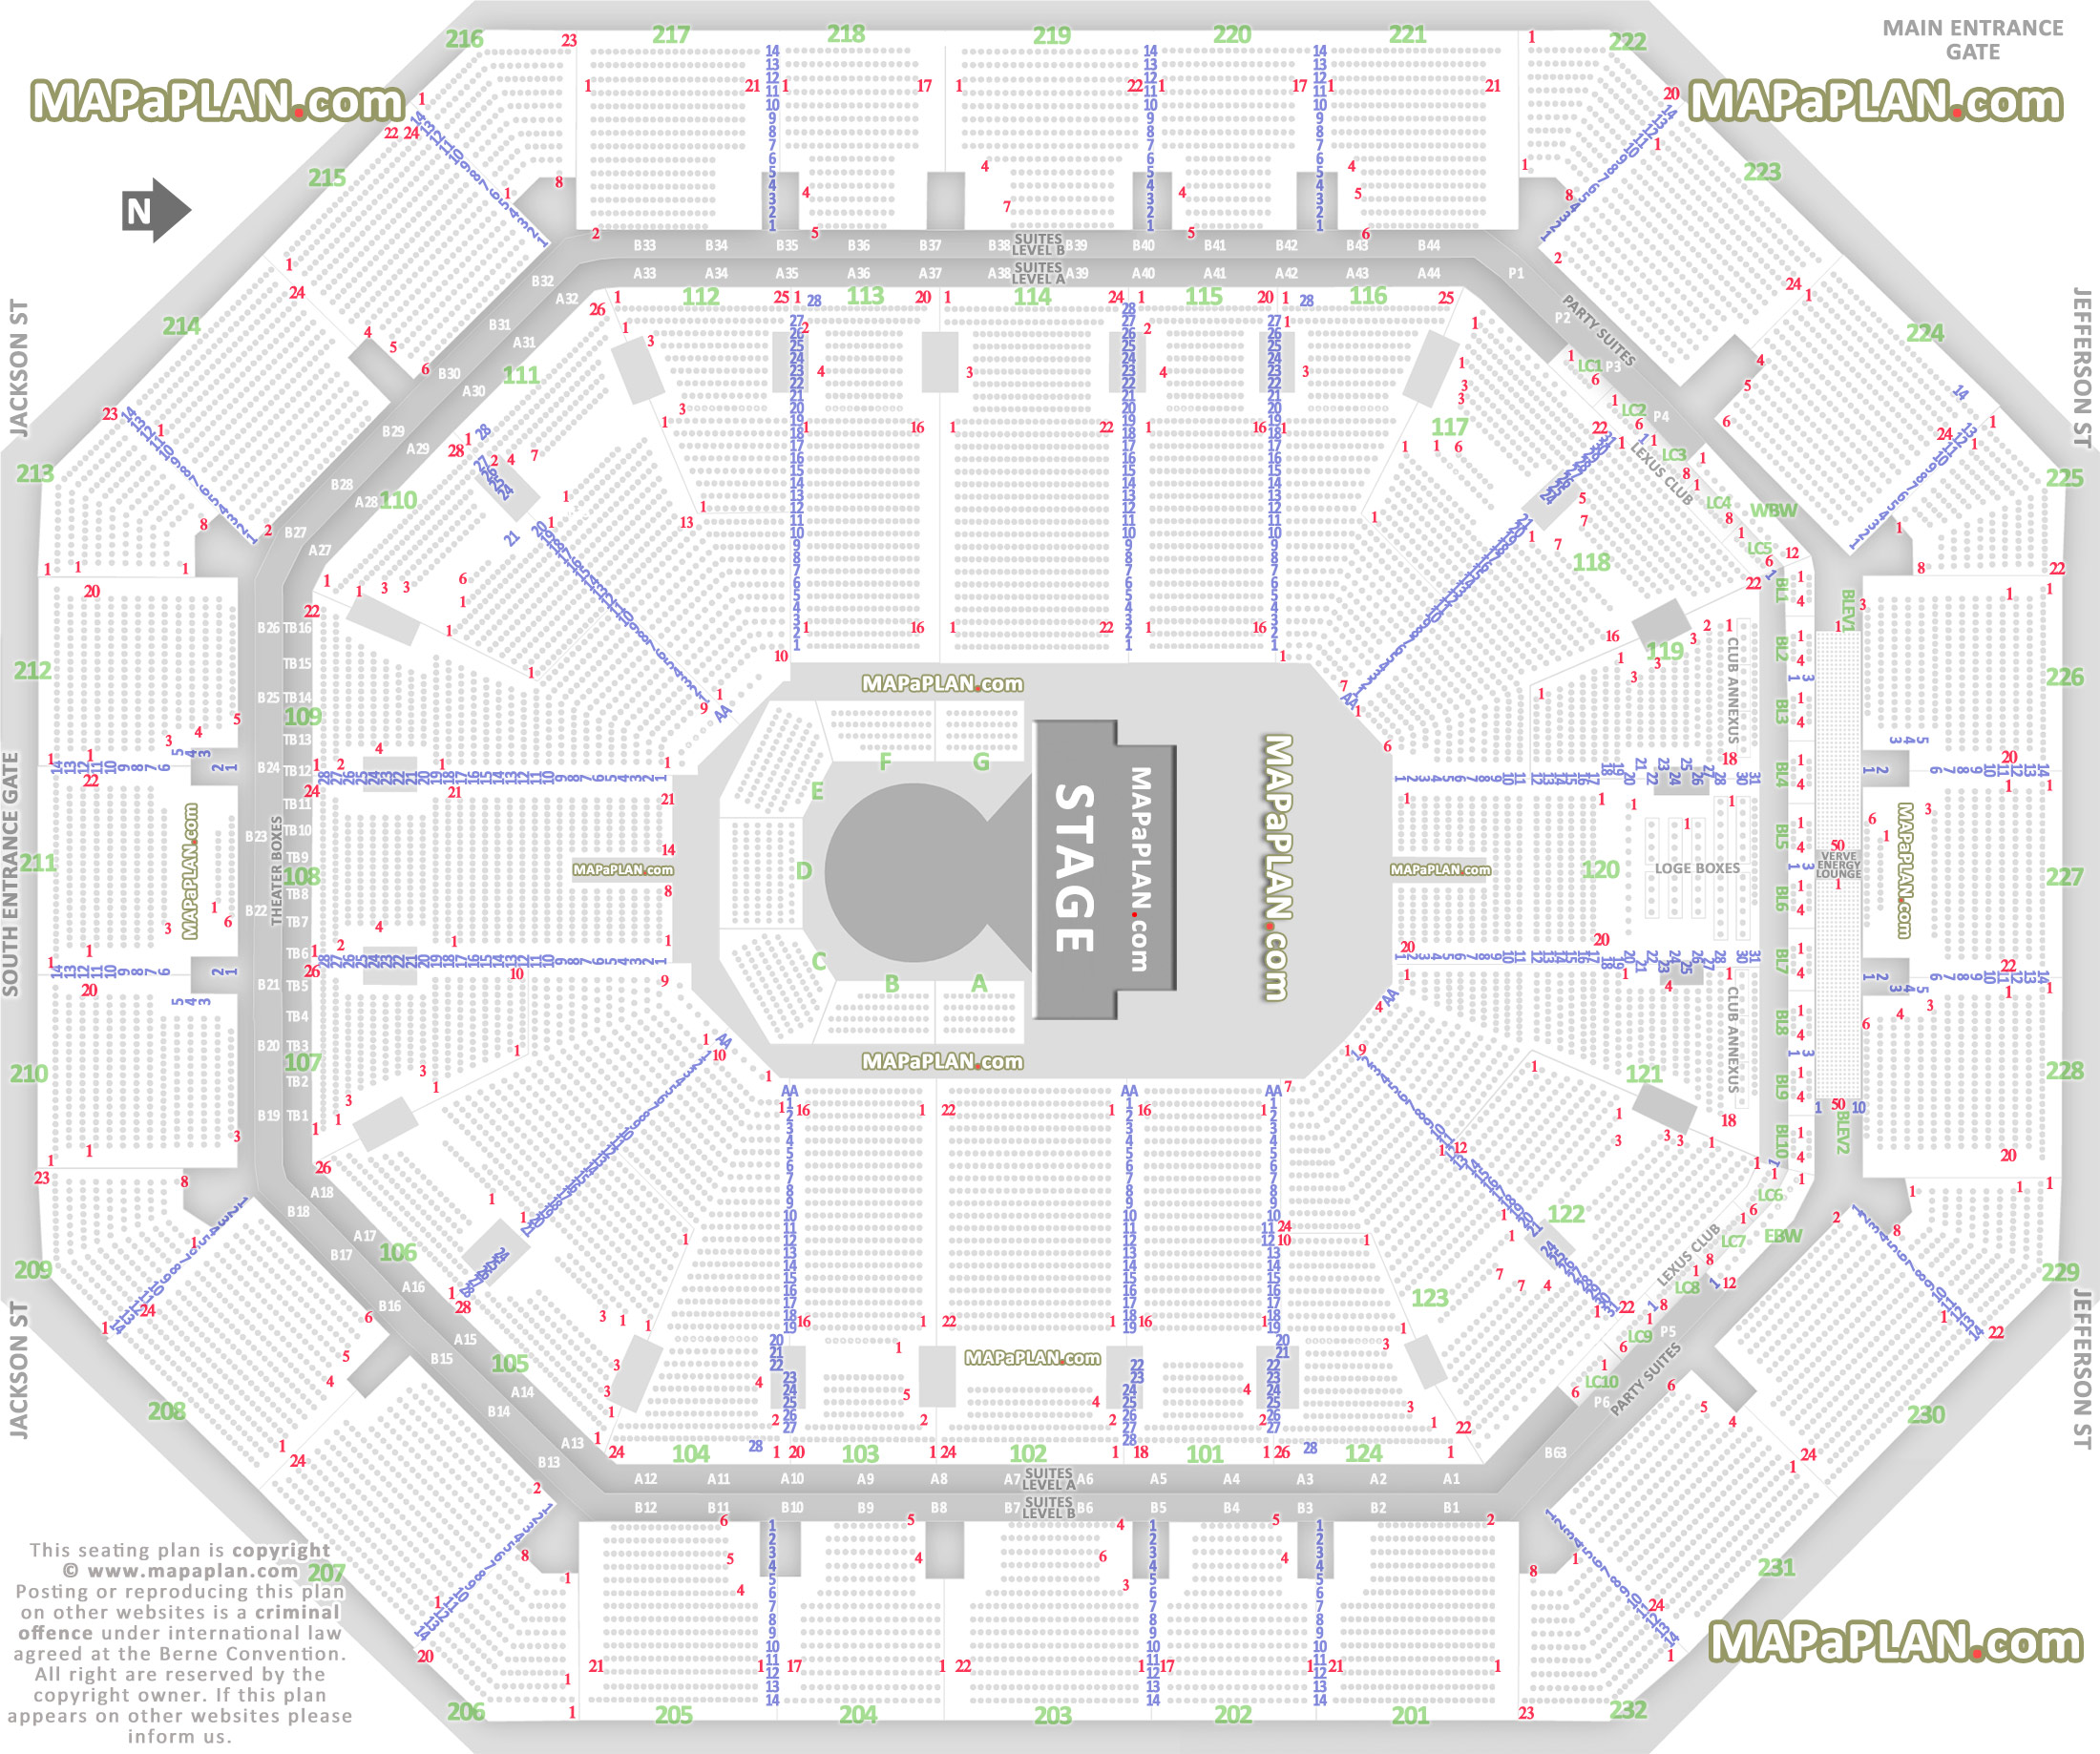 cirque soleil circus theater america west us airways center arizona az how many seats row section 101 104 105 106 107 108 109 111 120 124 204 207 209 230 Phoenix Footprint Center Arena seating chart